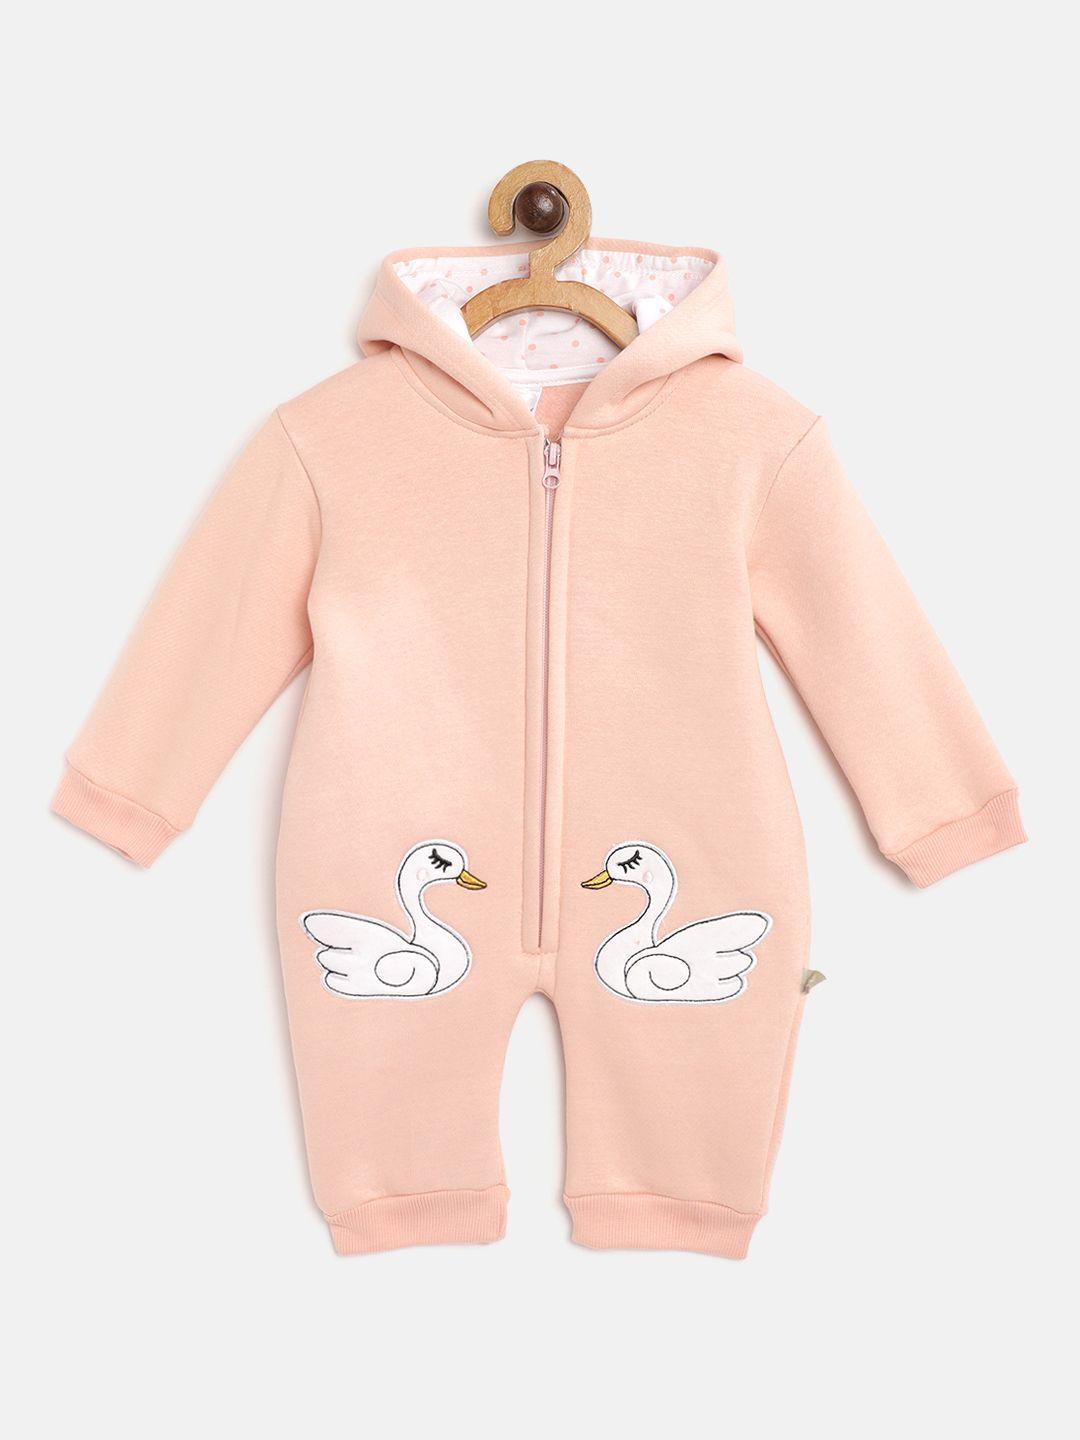 moms-love-infant-girls-peach-coloured-solid-cotton-hooded-rompers